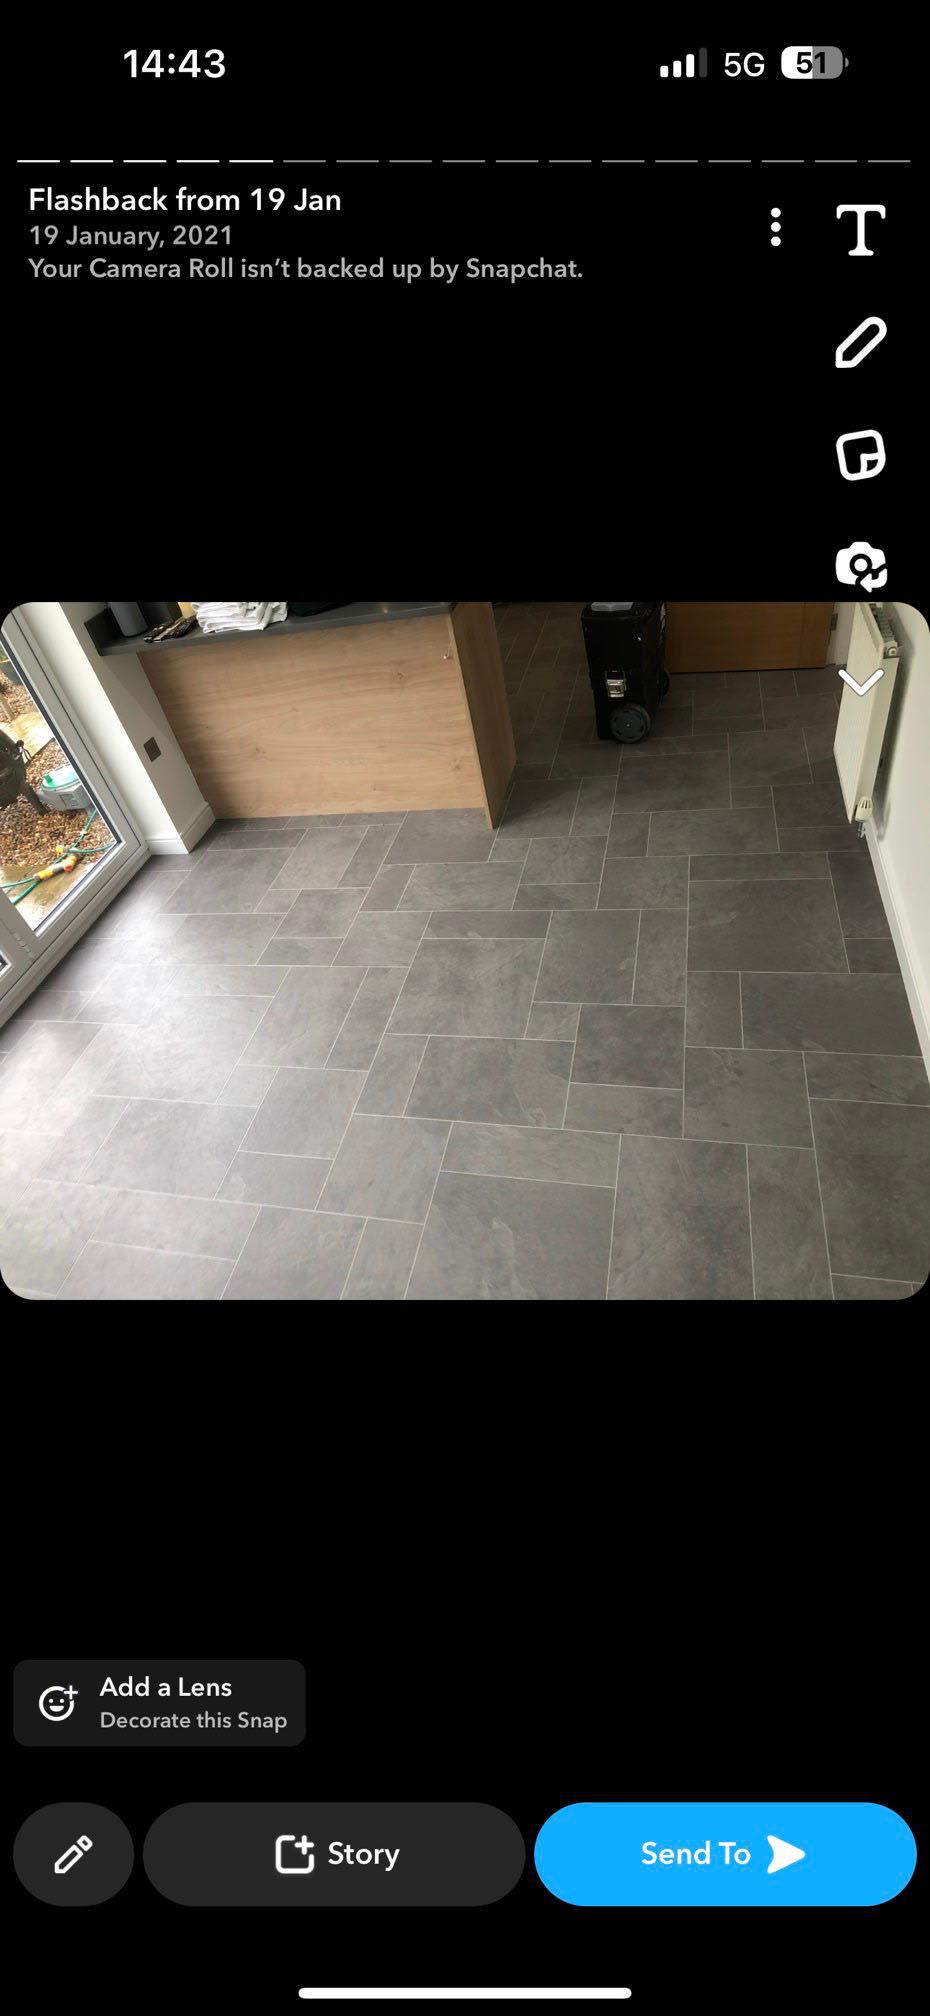 Images O'Donnell Flooring